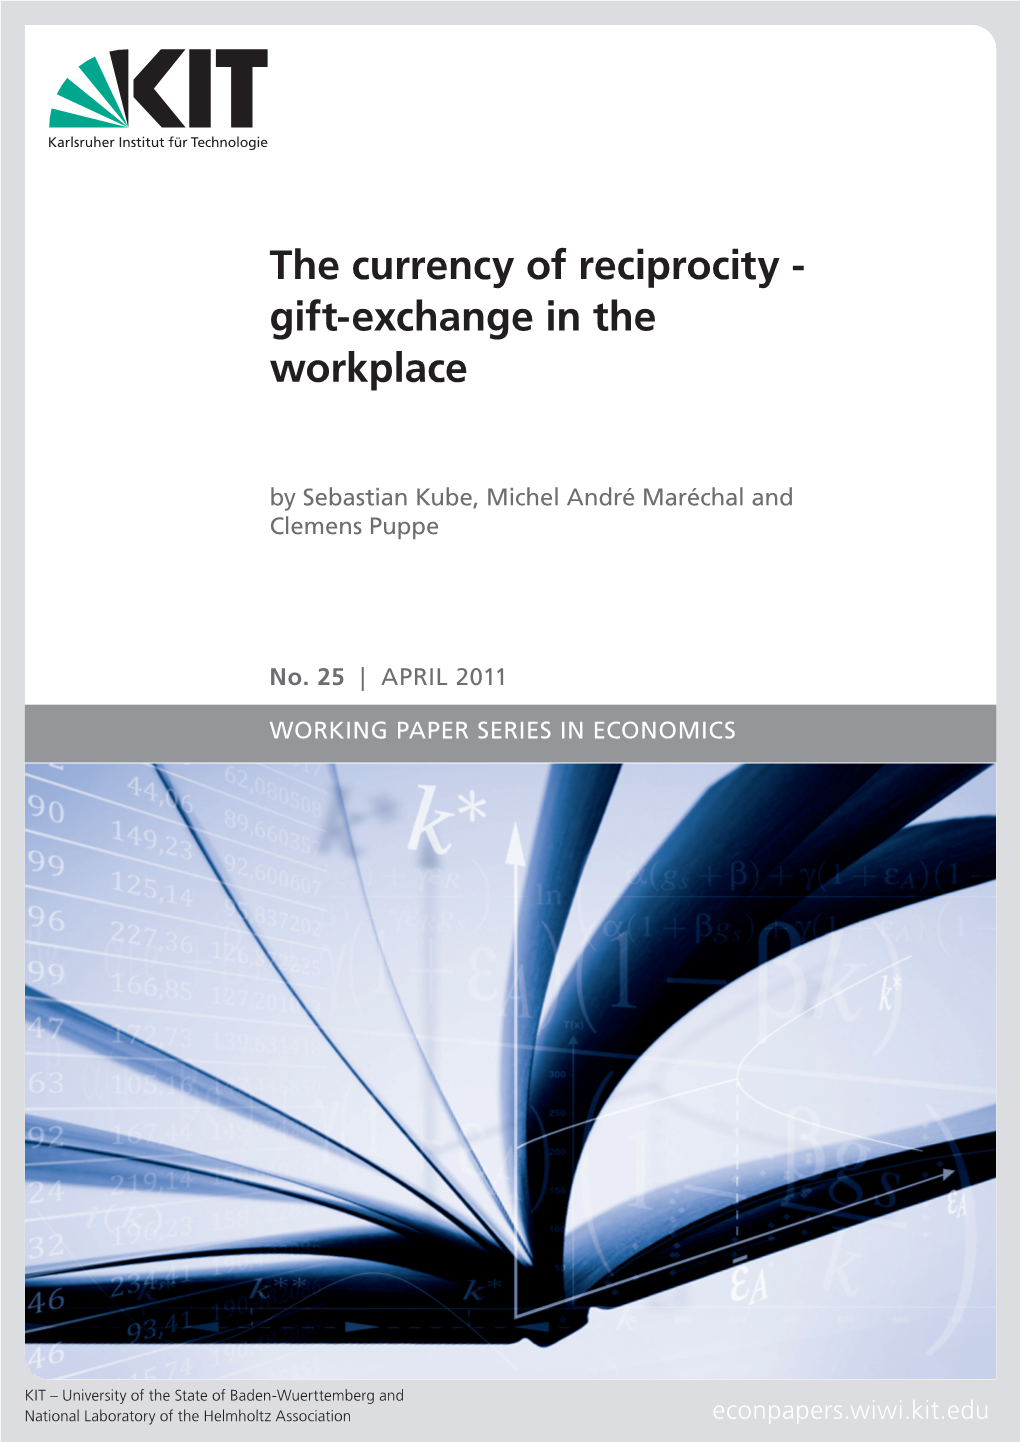 The Currency of Reciprocity - Gift-Exchange in the Workplace